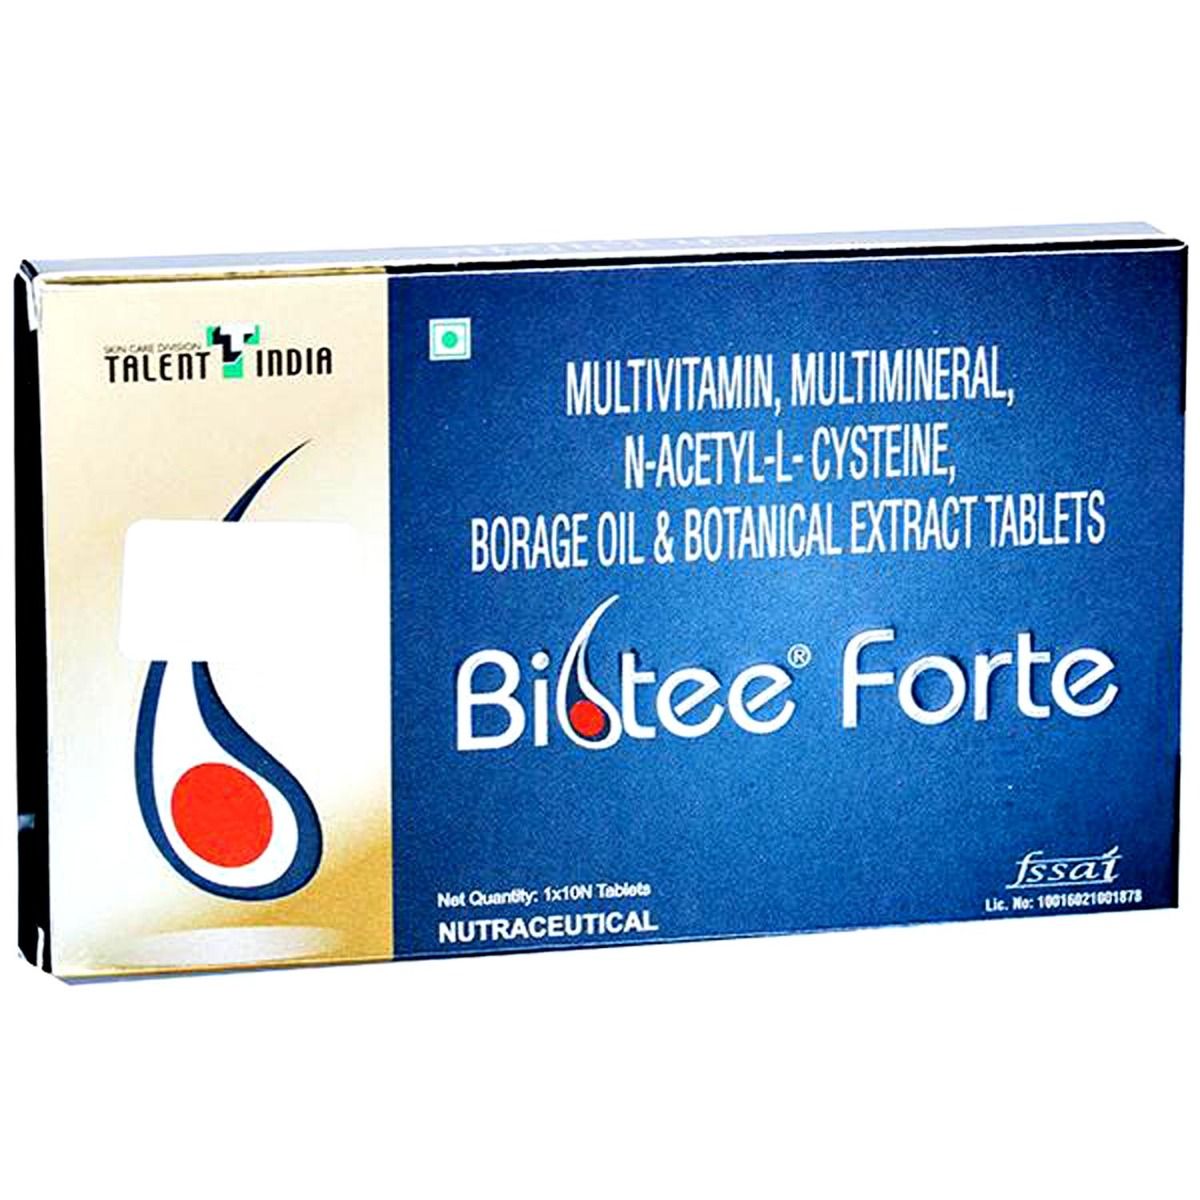 Biotee Forte Tablet 10's Price, Uses, Side Effects, Composition - Apollo  Pharmacy